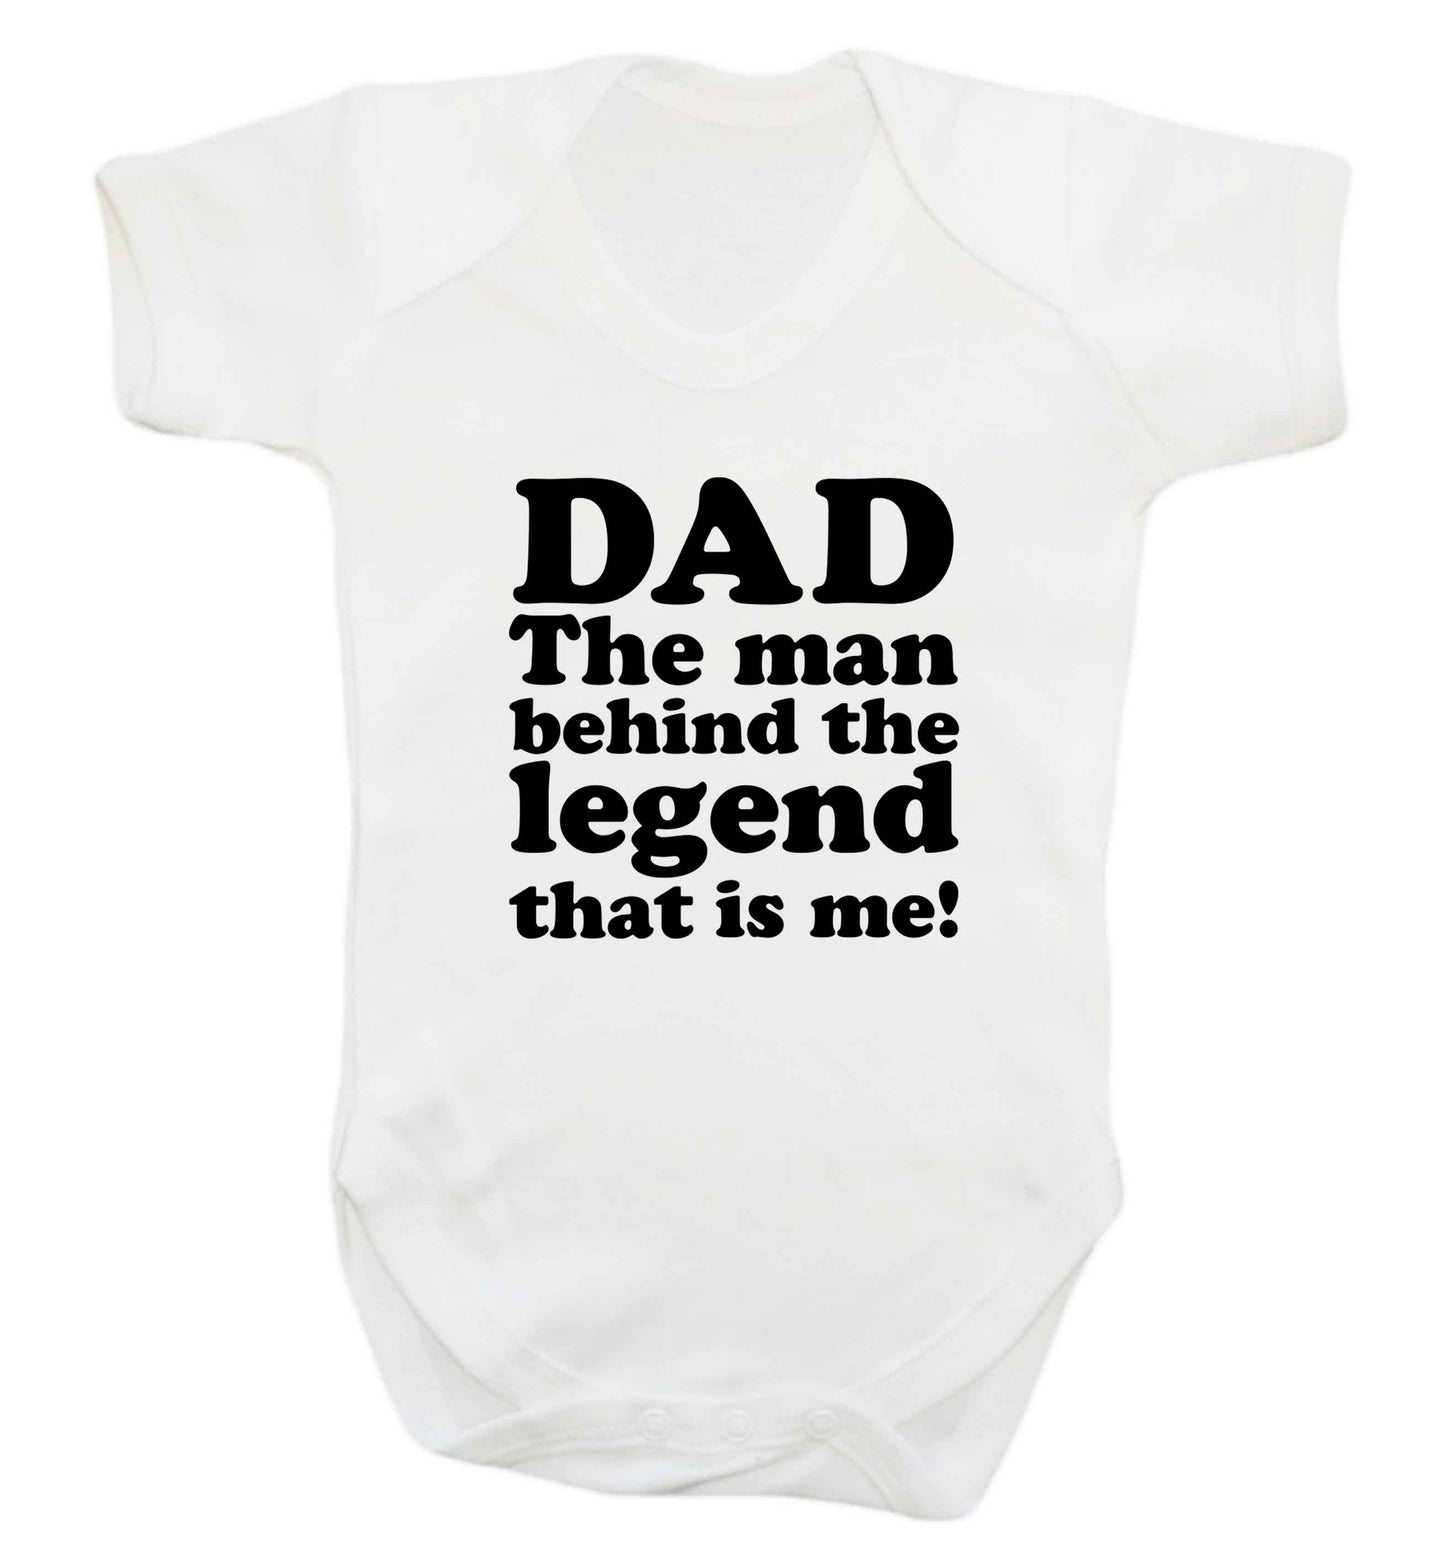 Dad the man behind the legend that is me baby vest white 18-24 months